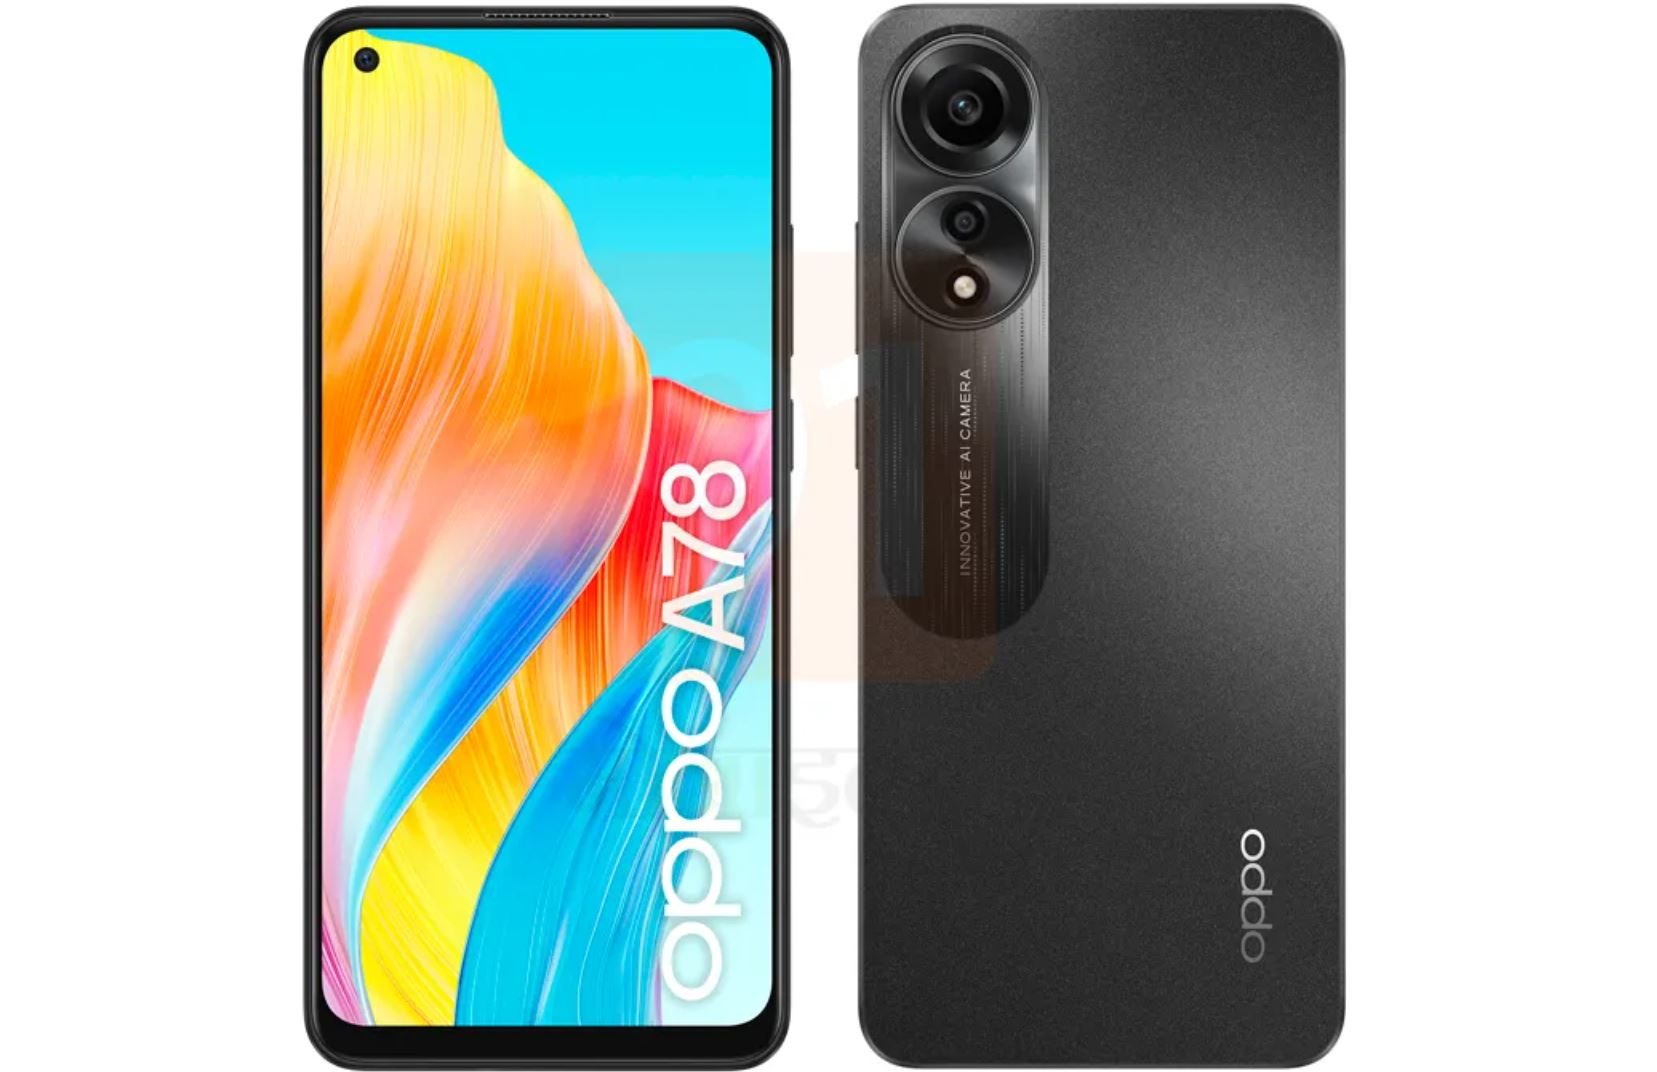 OPPO A78 5G Launch Date & Price Tipped; Reveals Specifications via